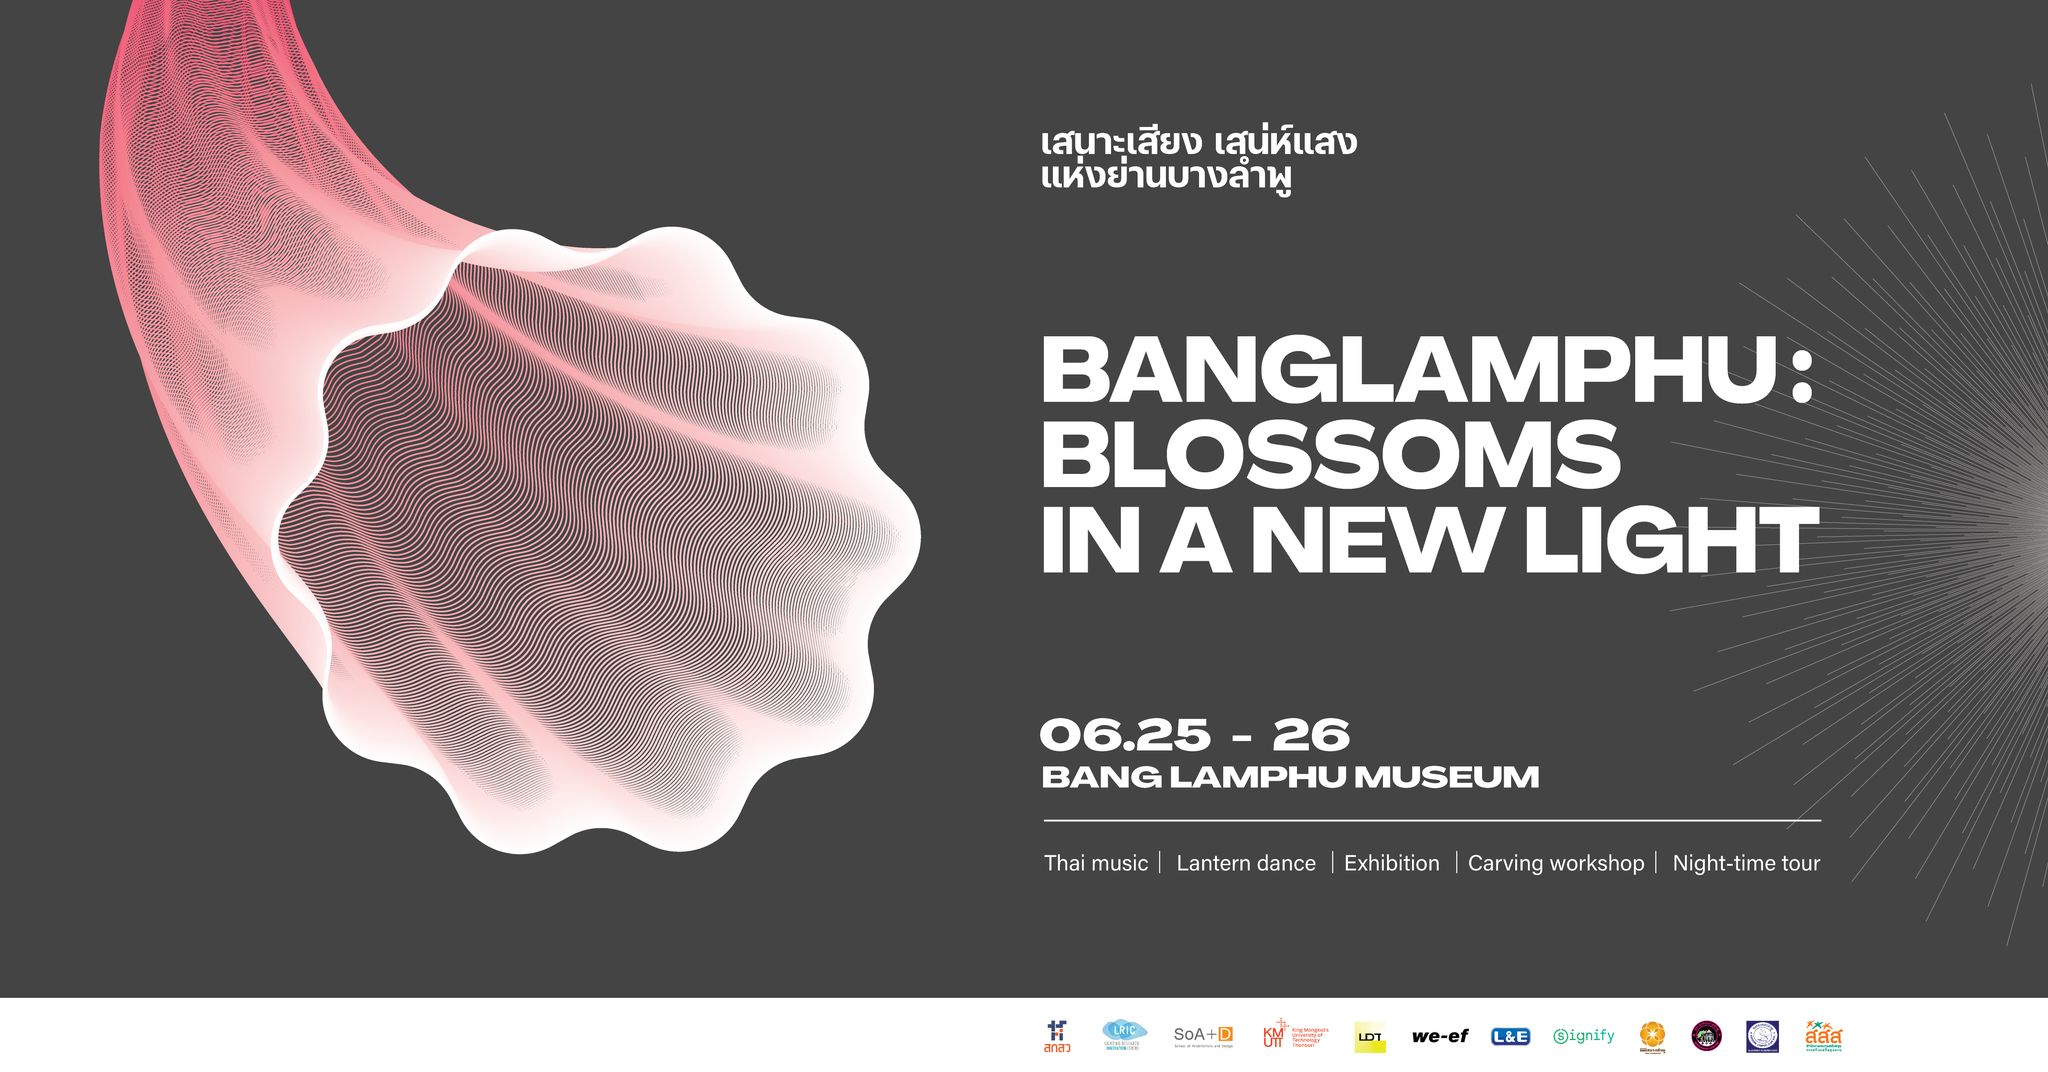 Banglamphu – Blossoms in a new light